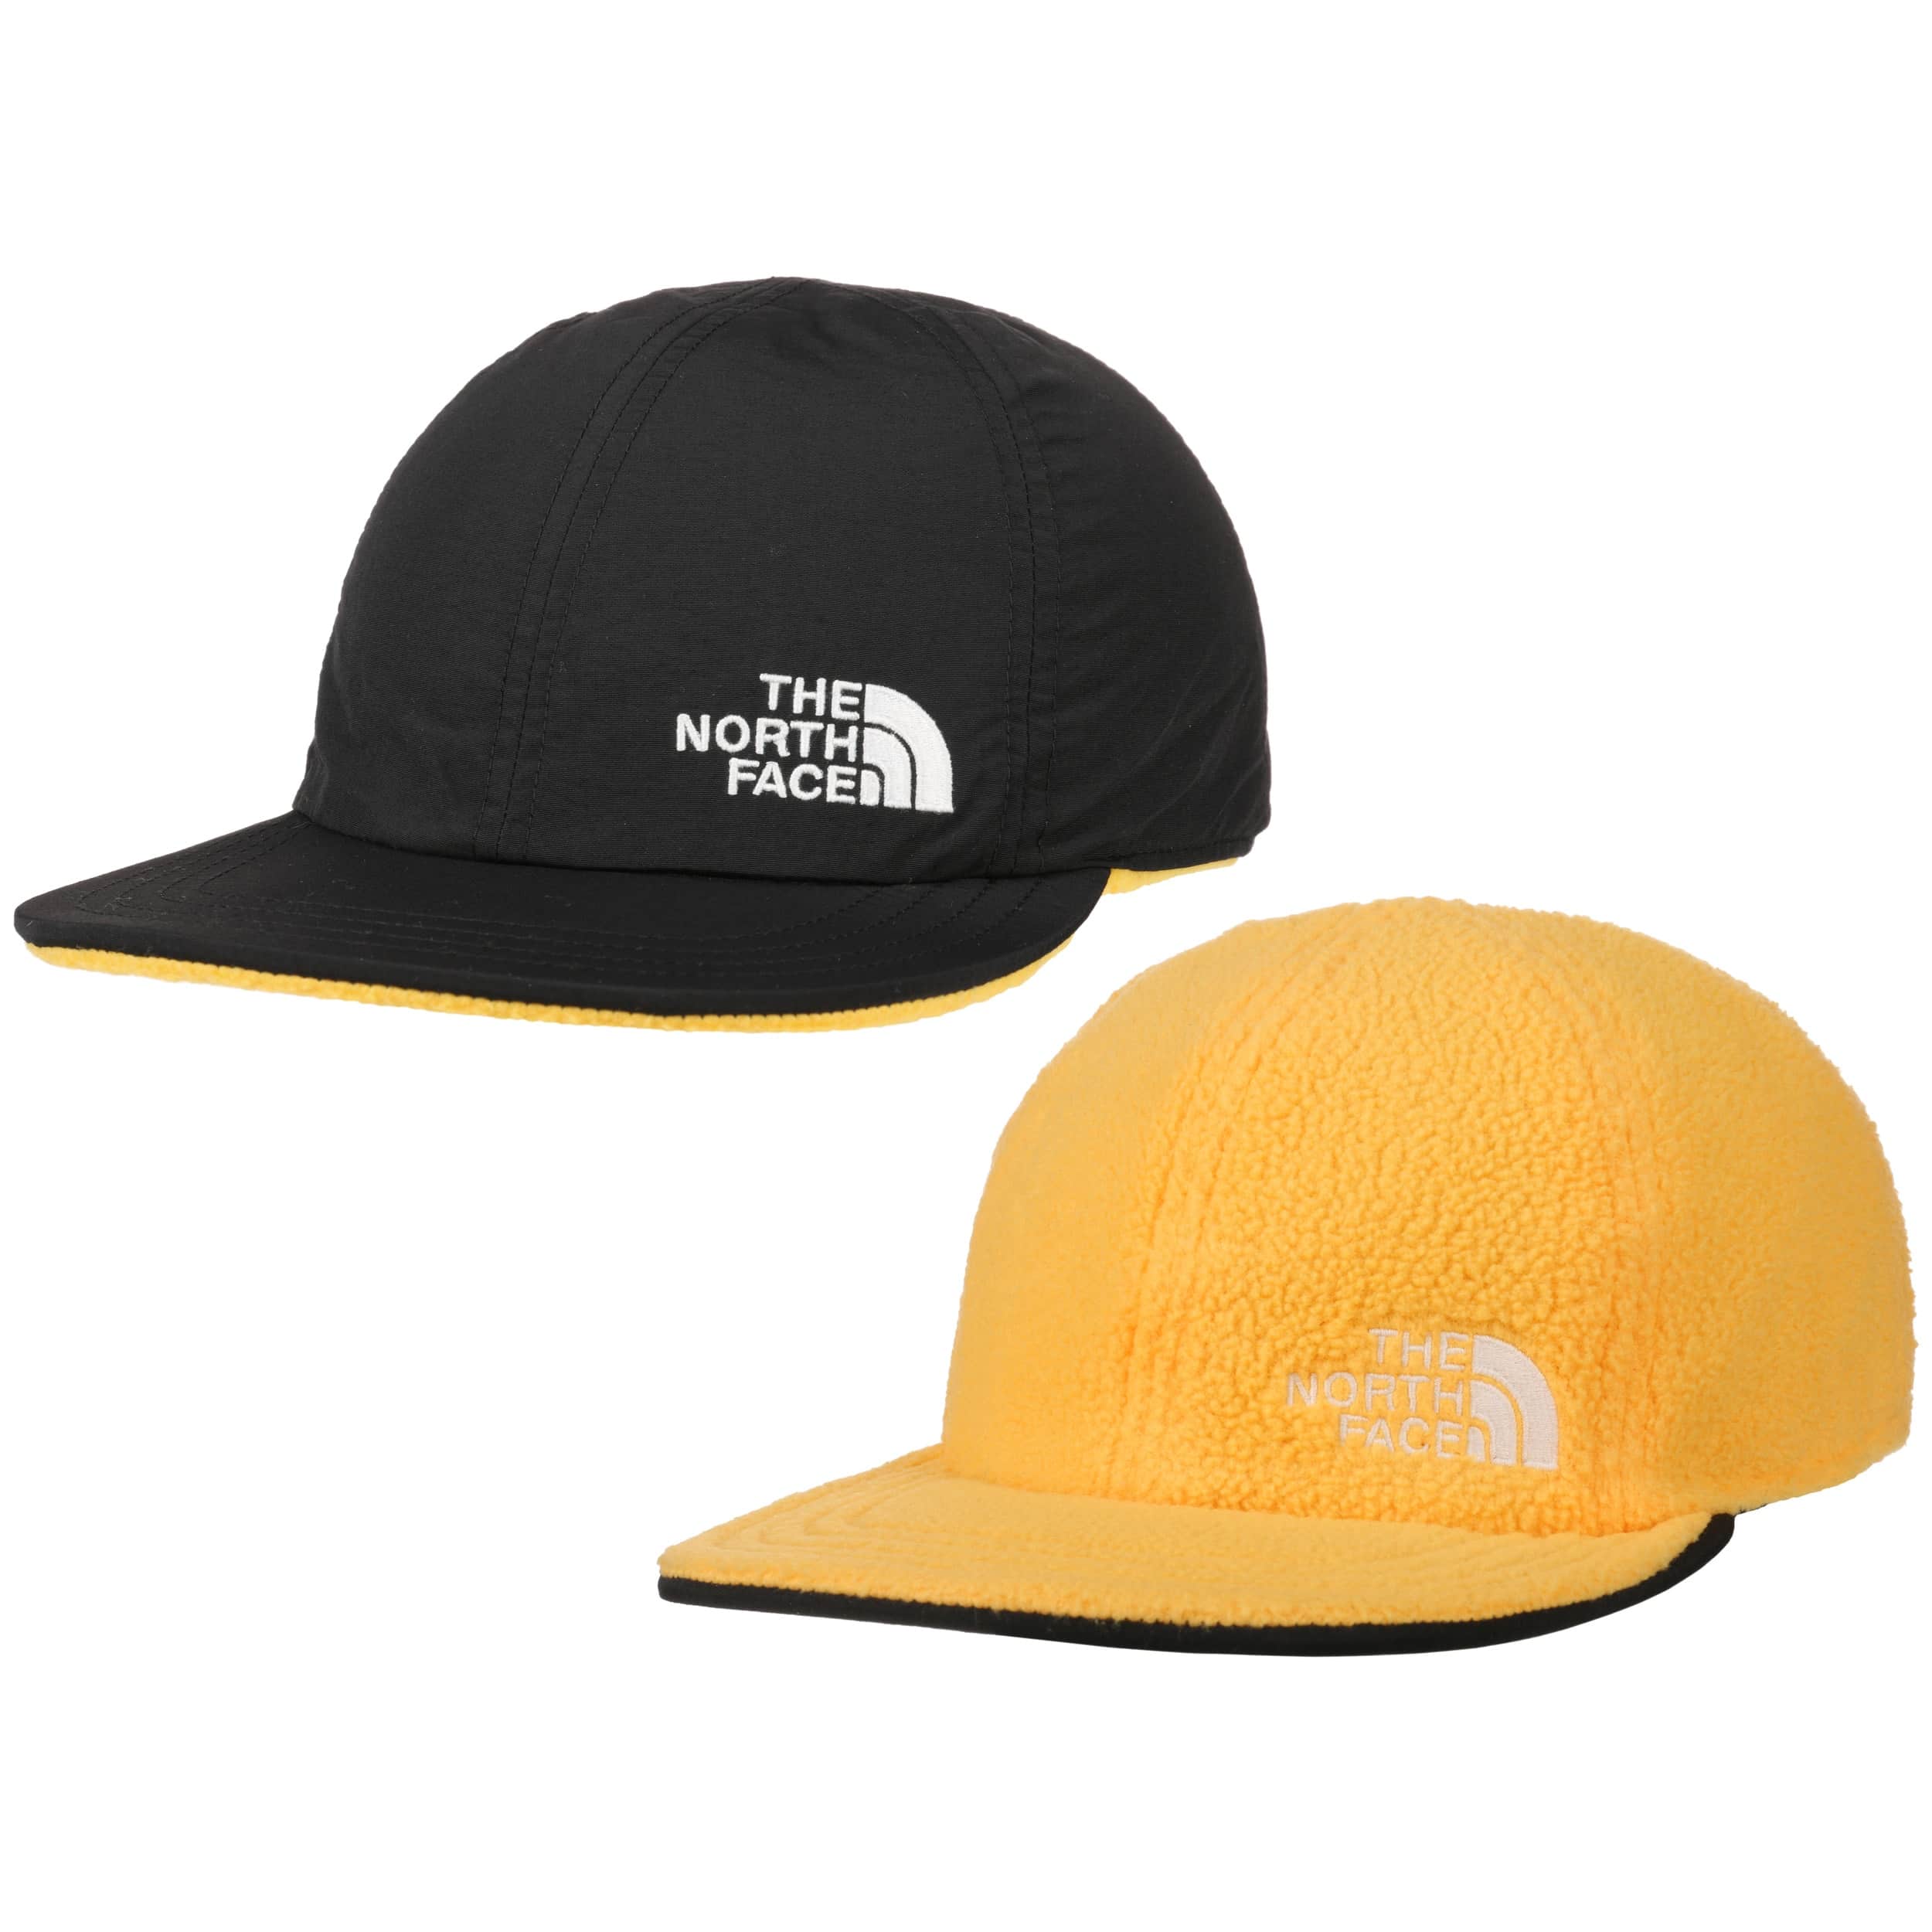 Fleece Norm Reversible Cap by The North Face